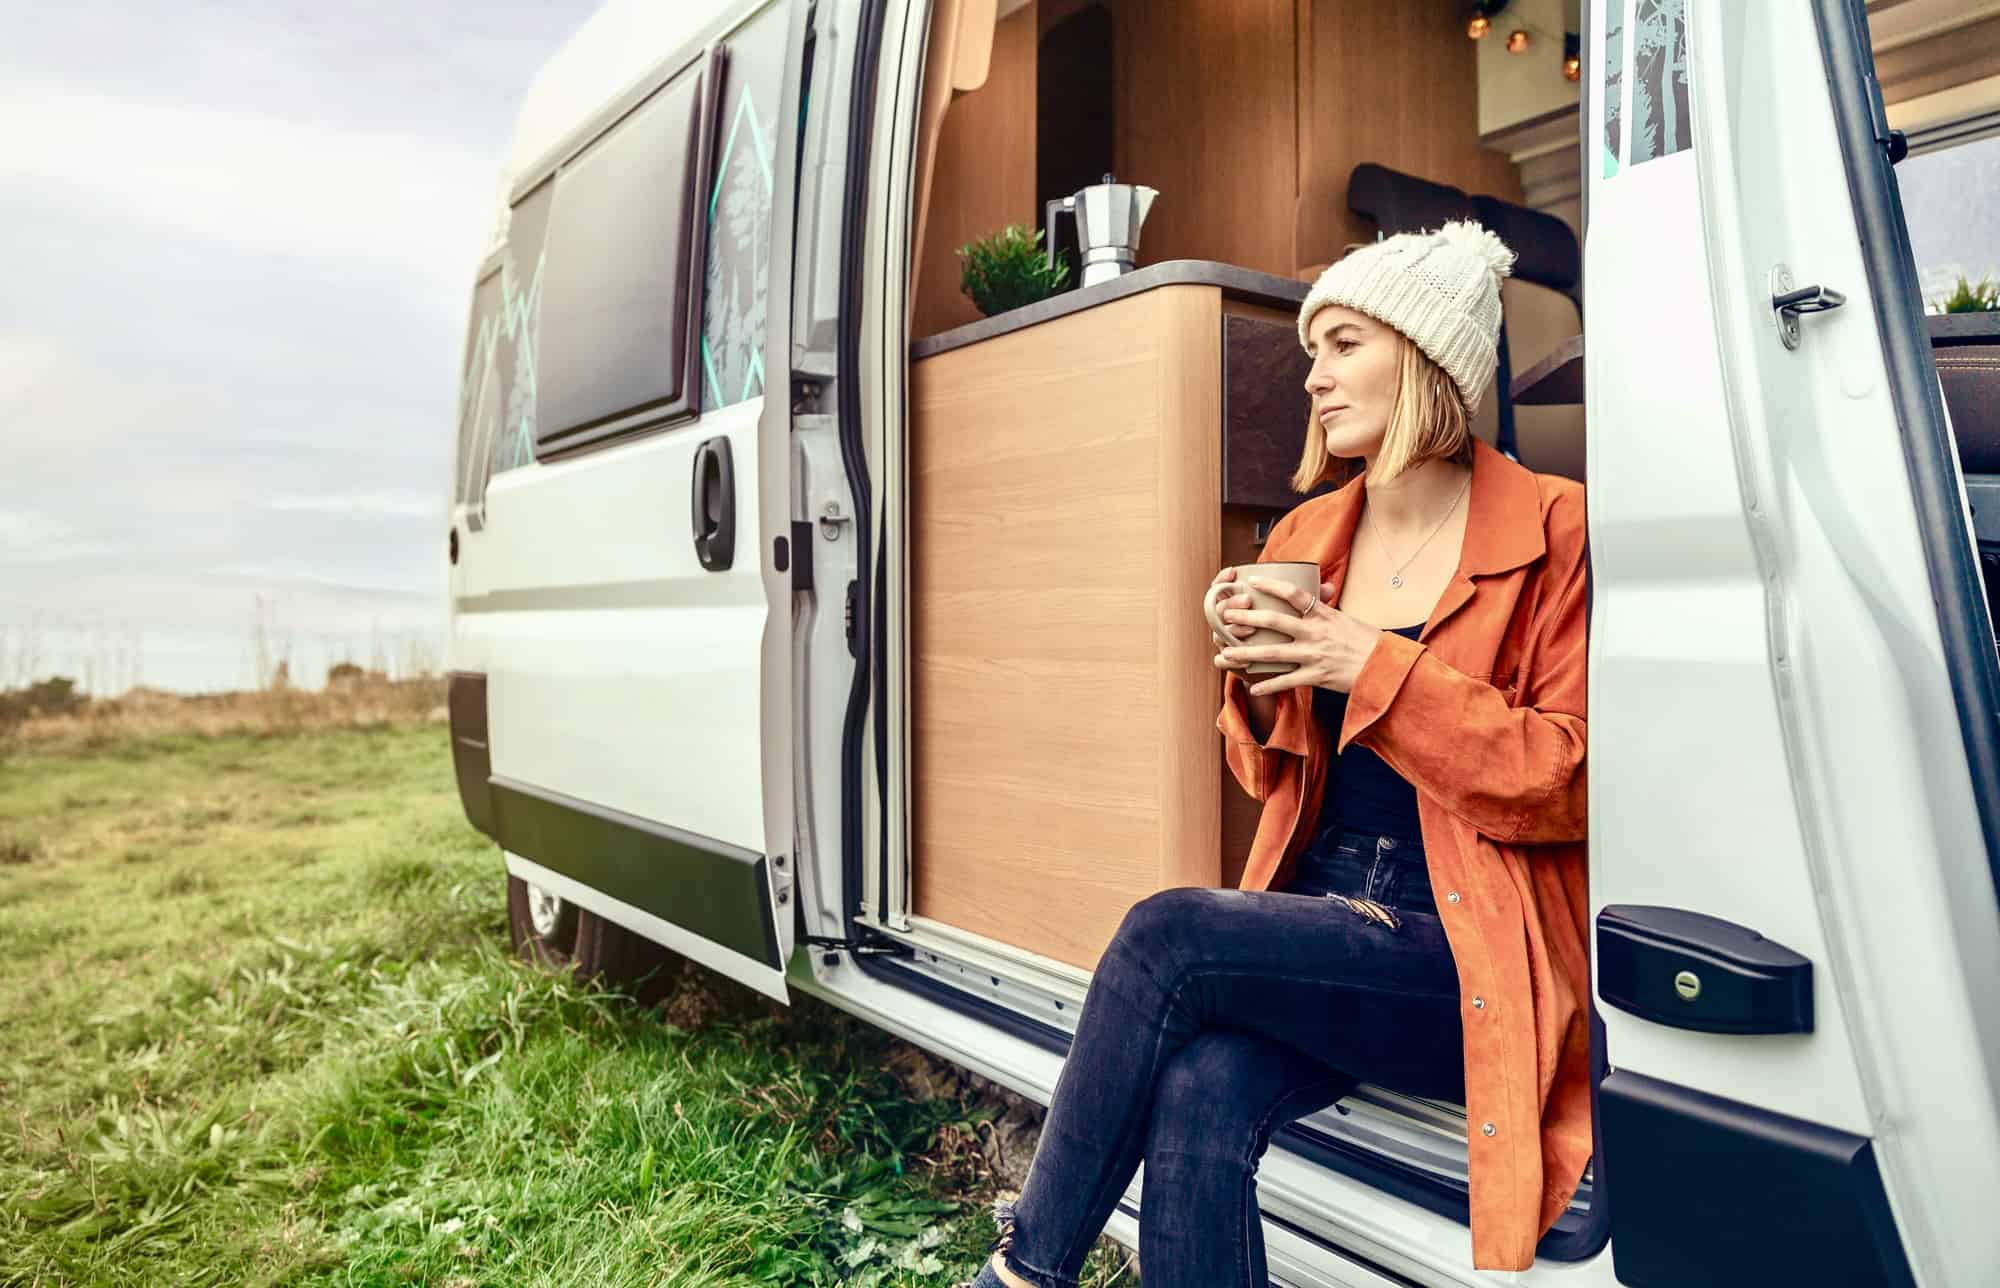 Safety-and-security-tips-for-women-traveling-alone-in-a-van-vanlifedaily